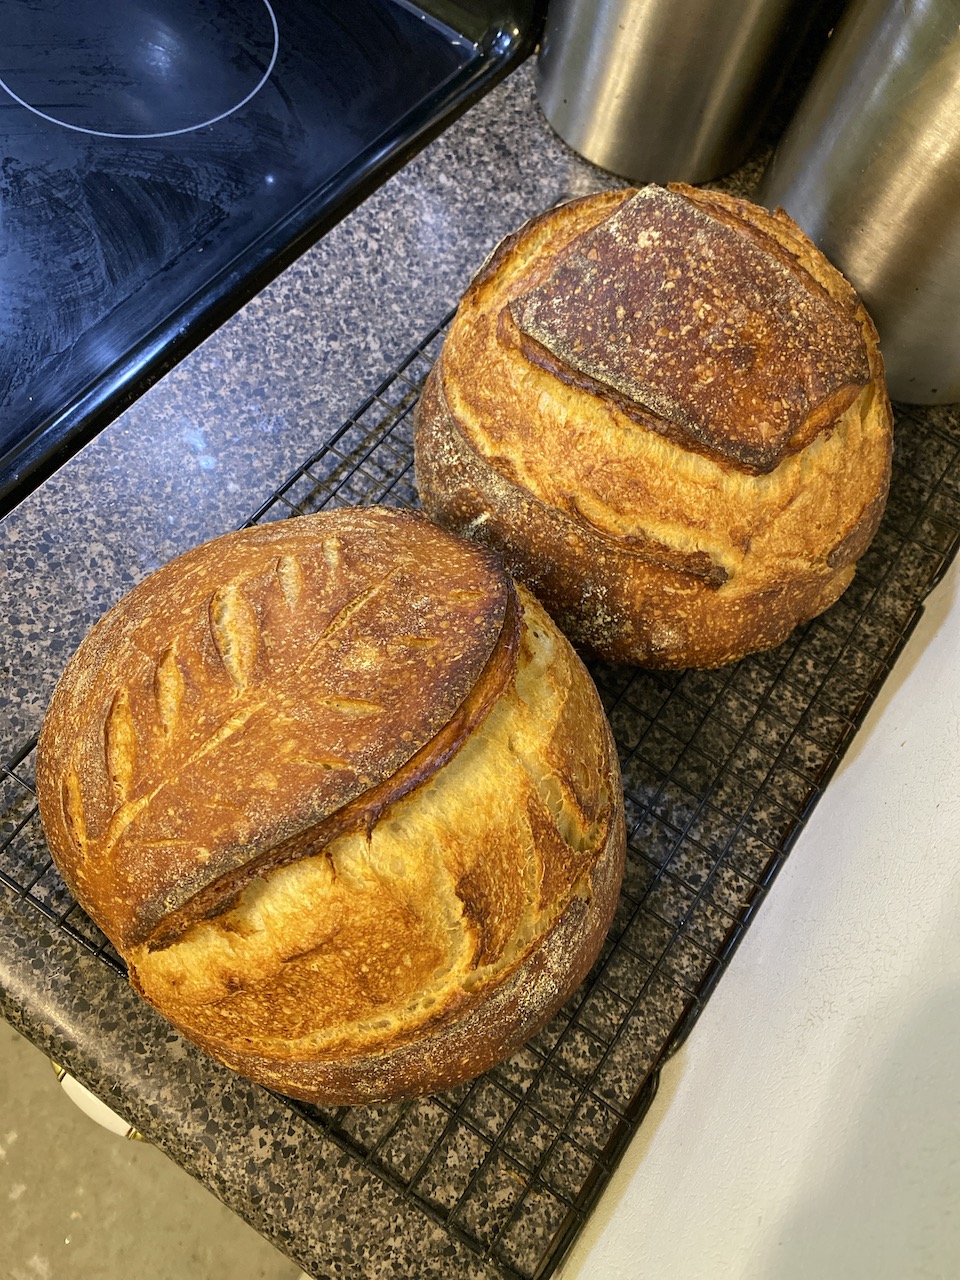 Two gorgeous loaves of pain au levain on a cooling rack.